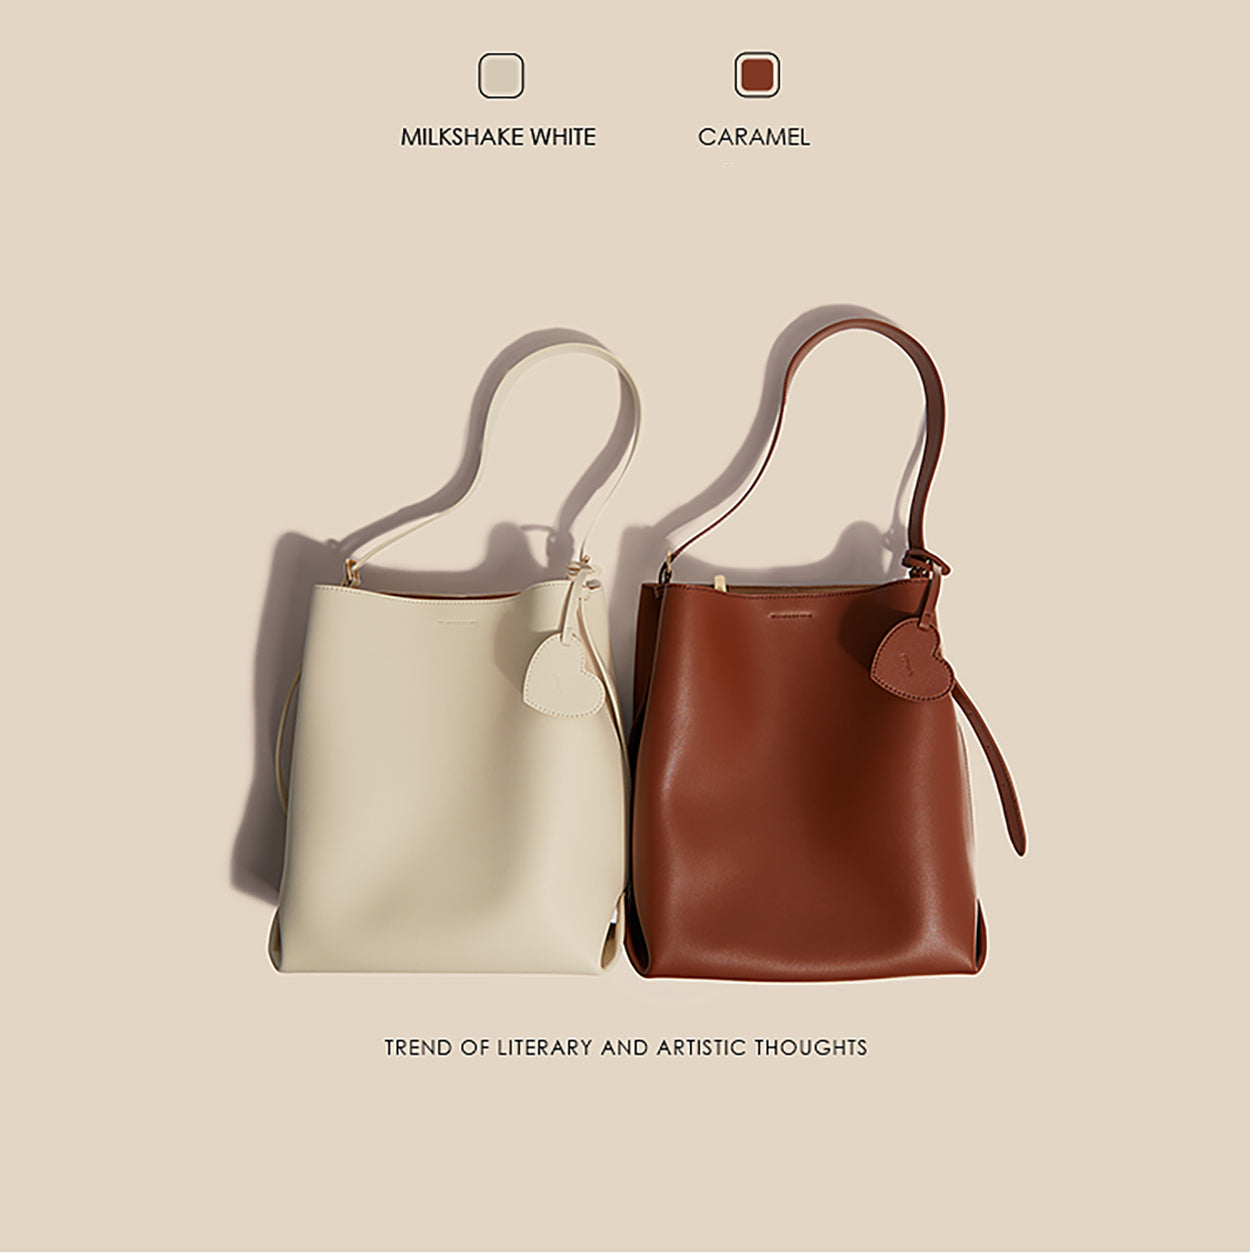 Women Leather Tote Bag